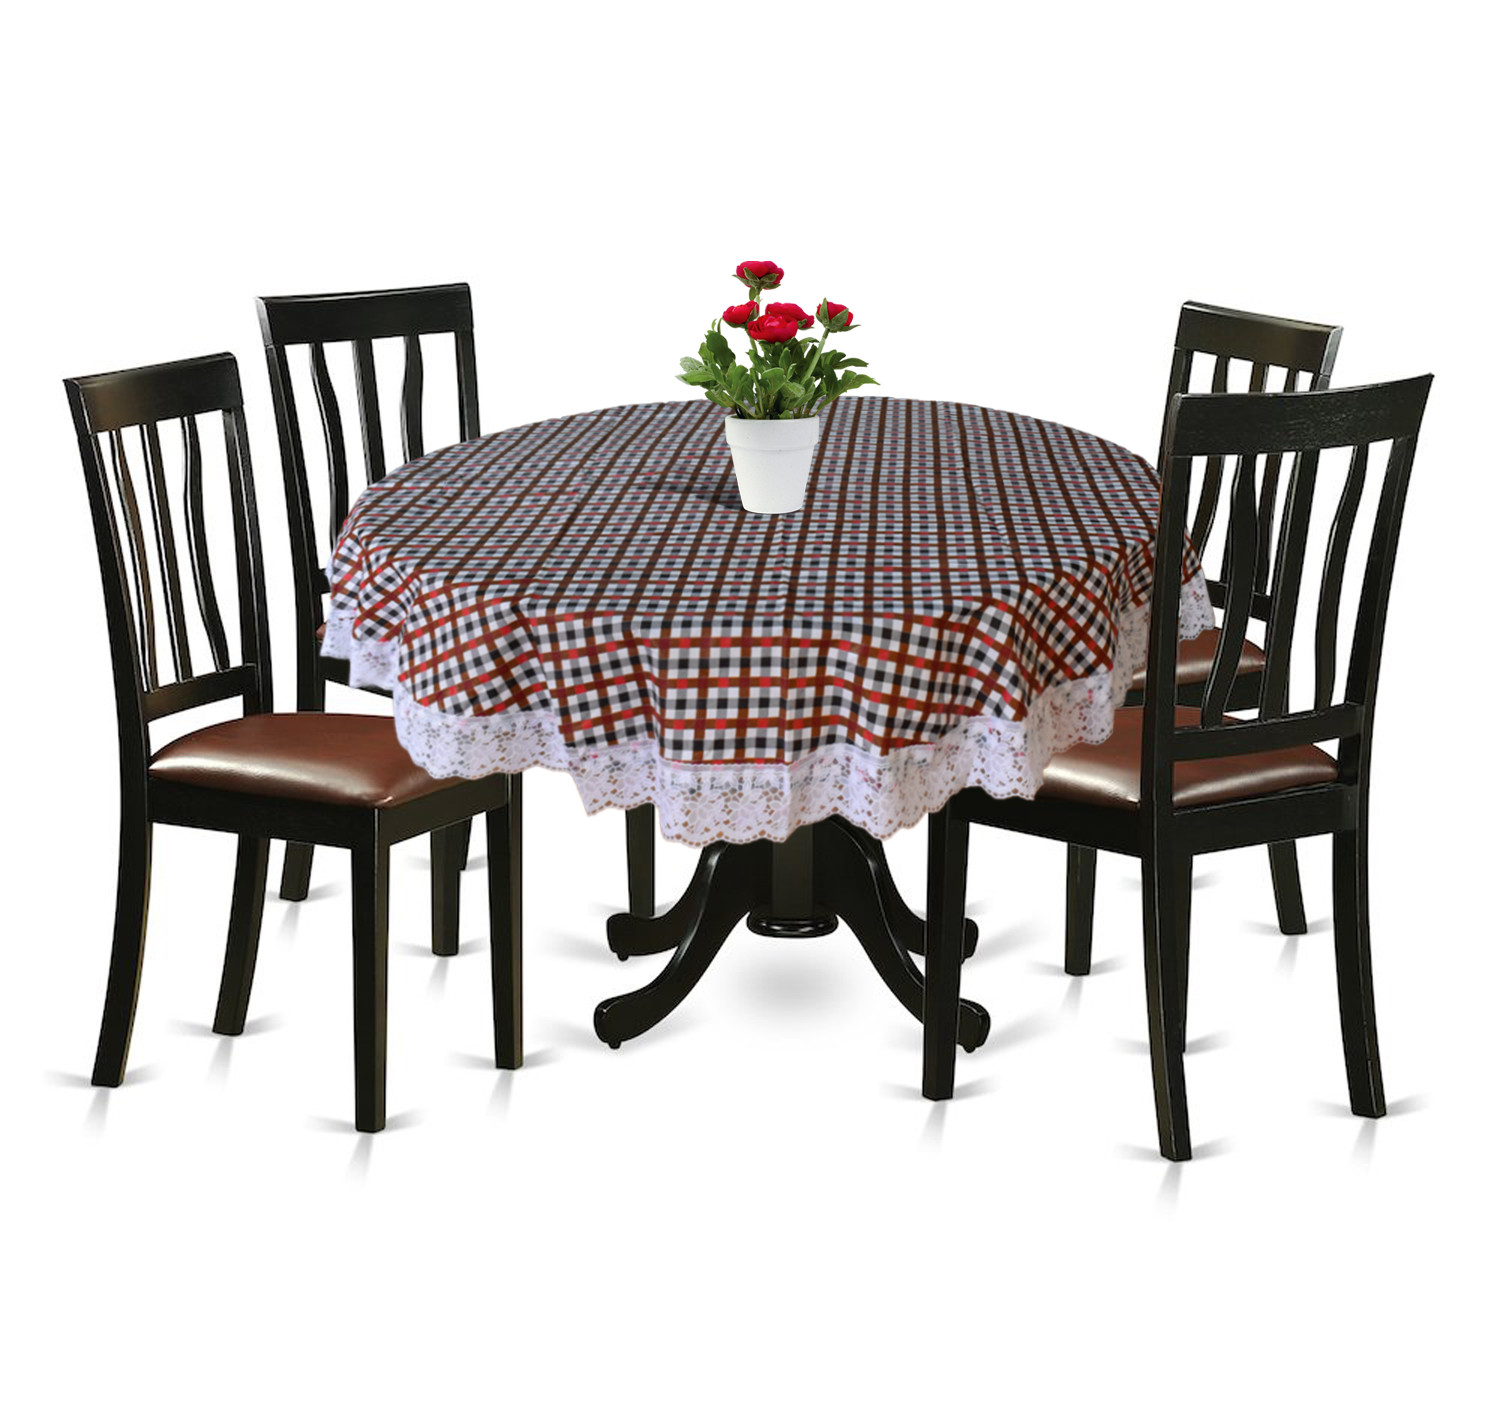 Kuber Industries Check Printed PVC 4 Seater Round Shape Table Cover, Protector With White Lace Border, 60